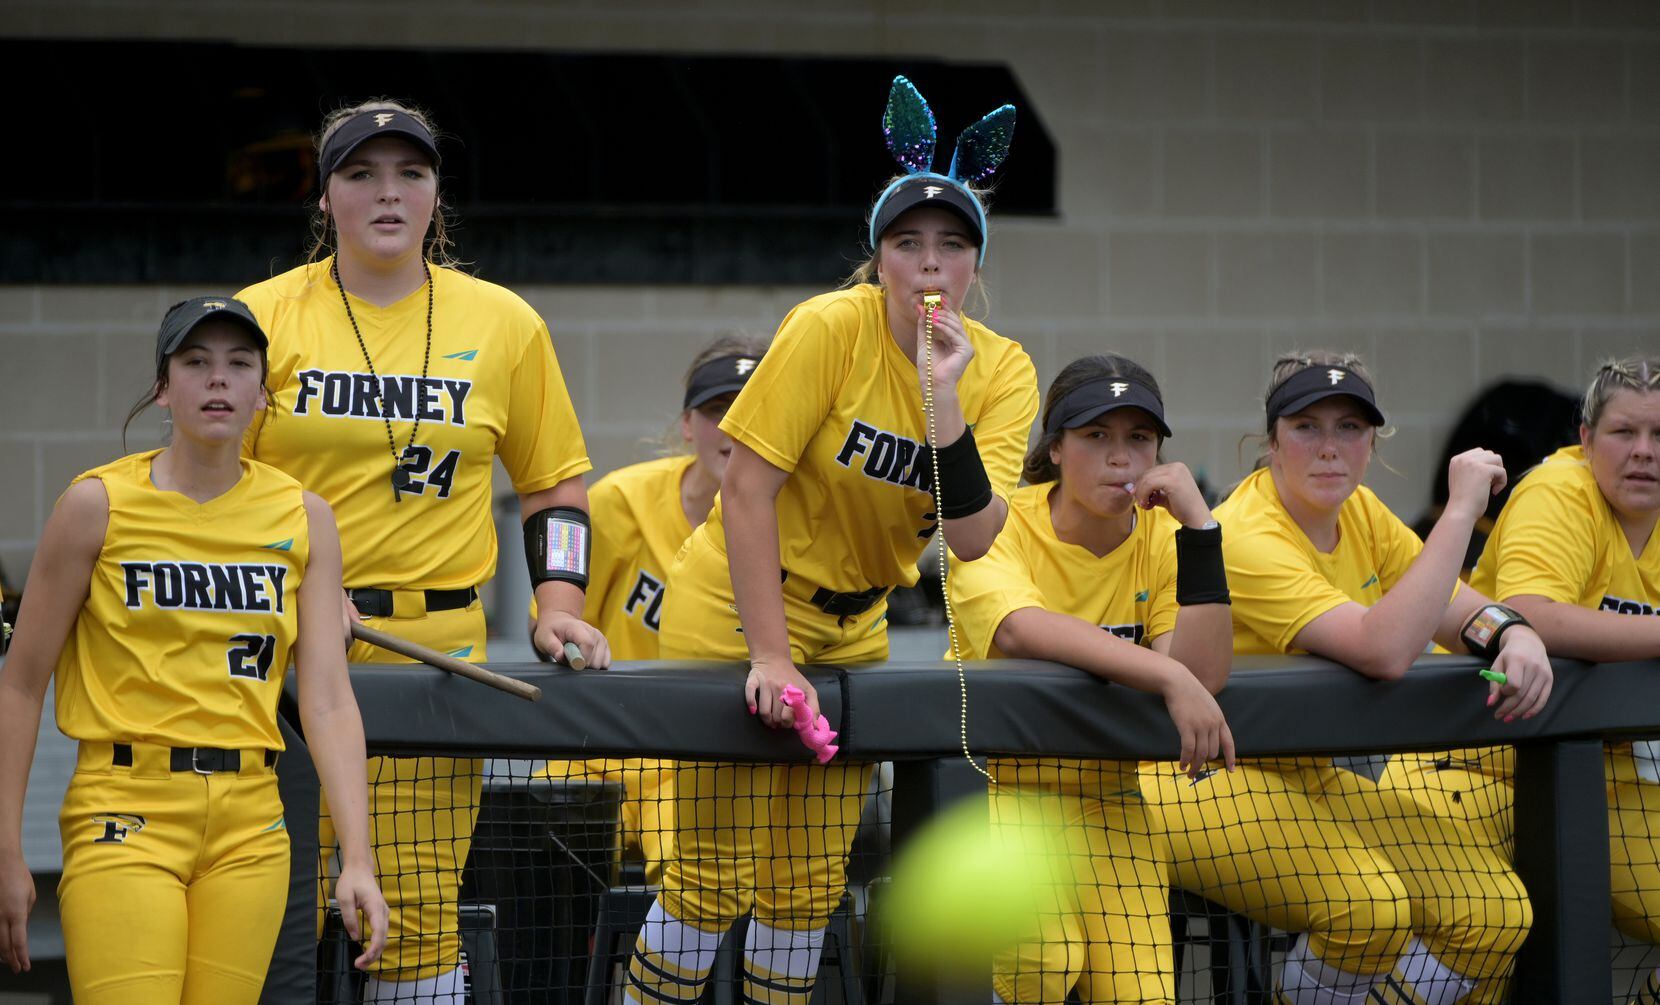 Forney players watch as a ball is hit into play during game 3 of a Class 5A Region II...